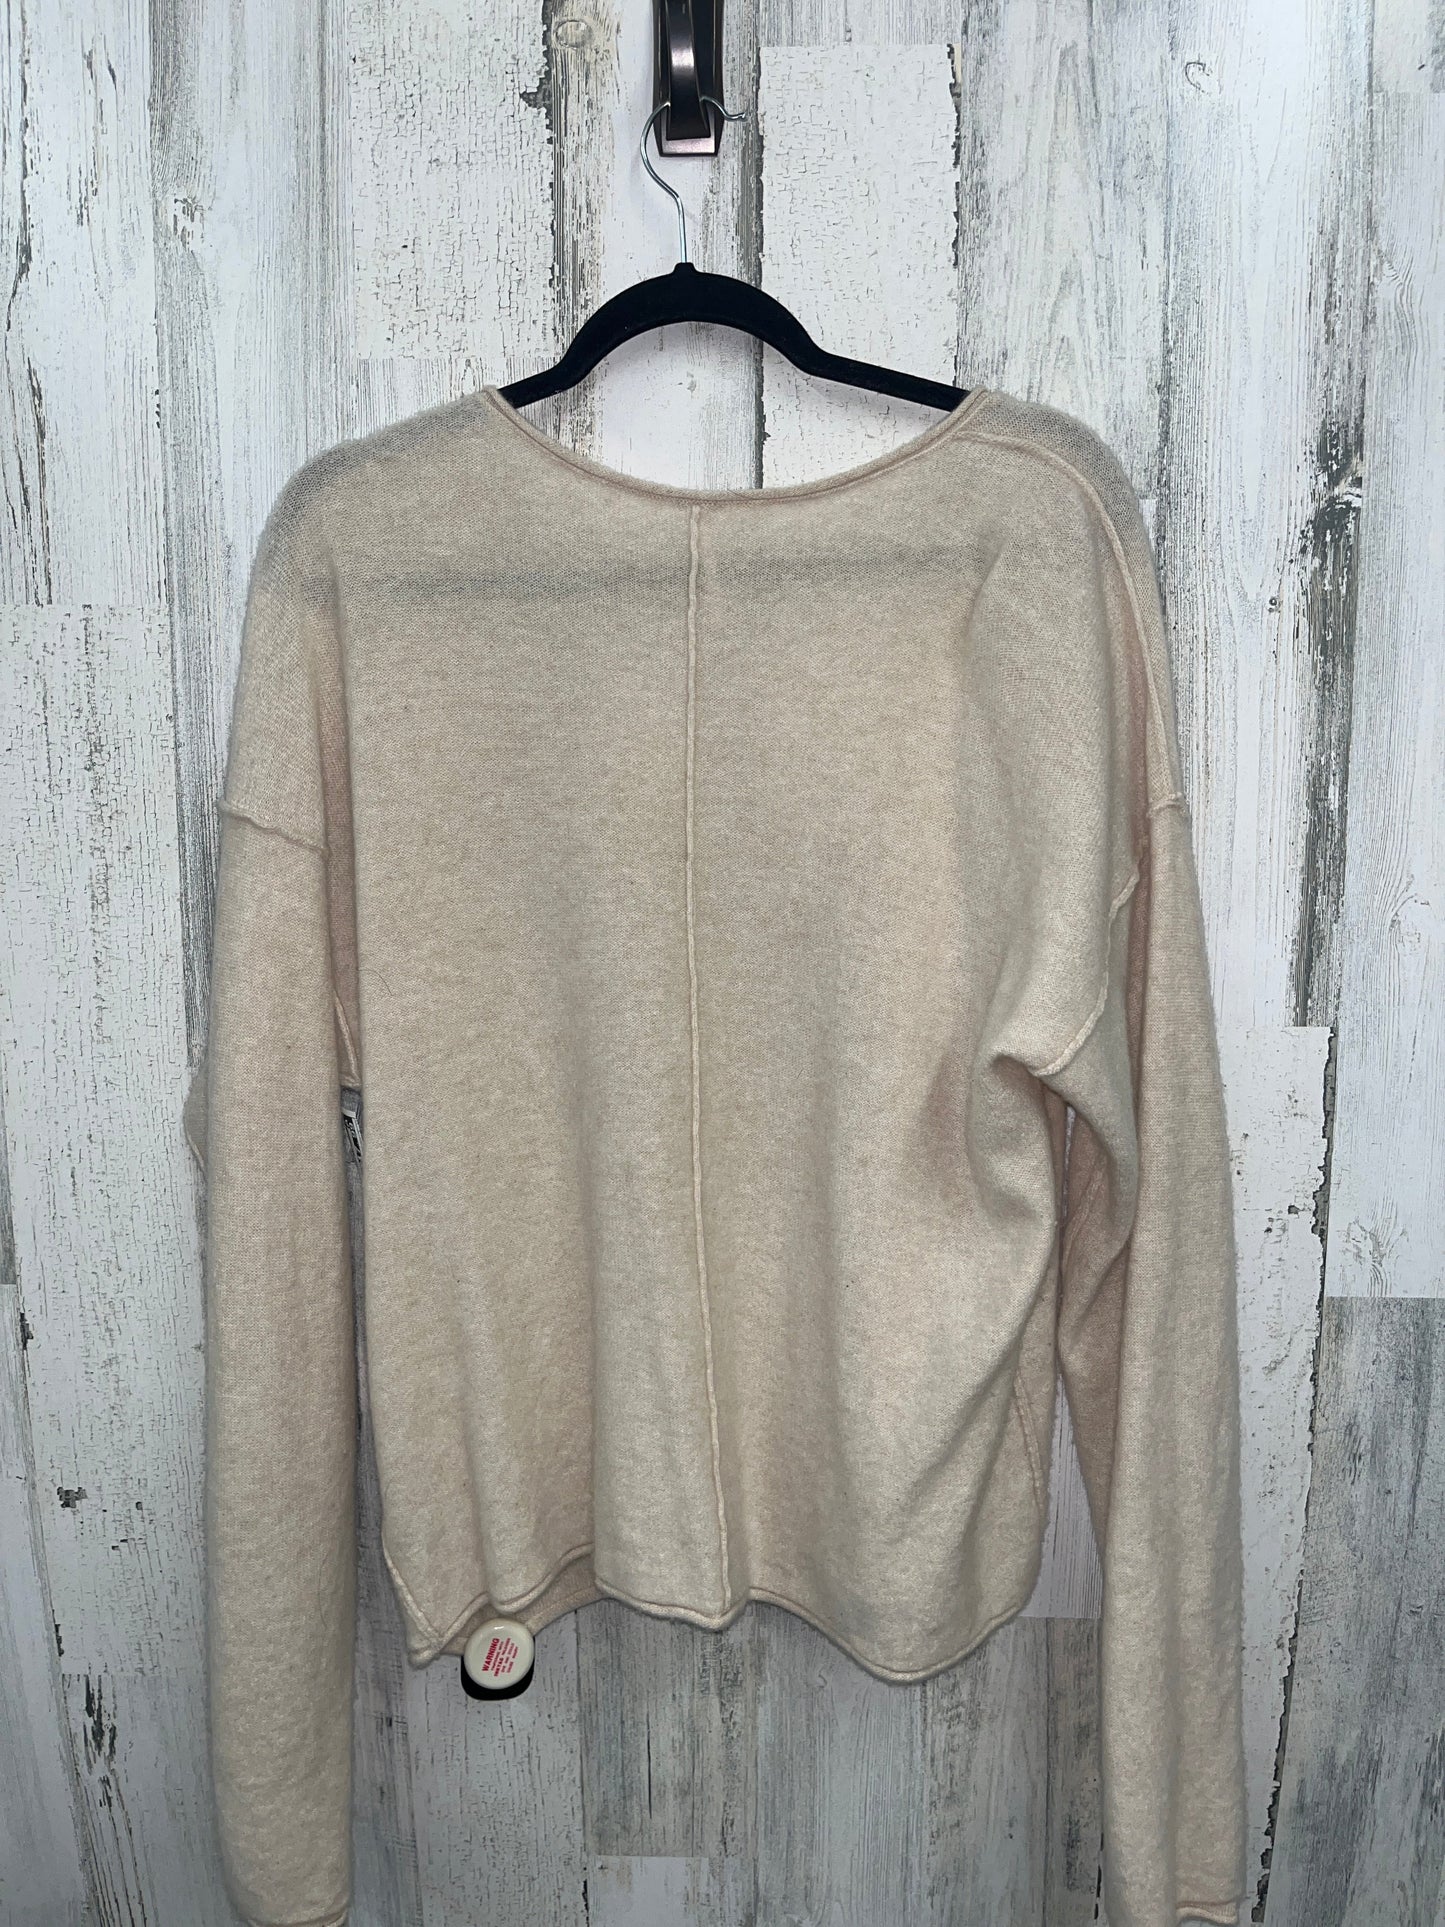 Sweater By Free People  Size: Xl